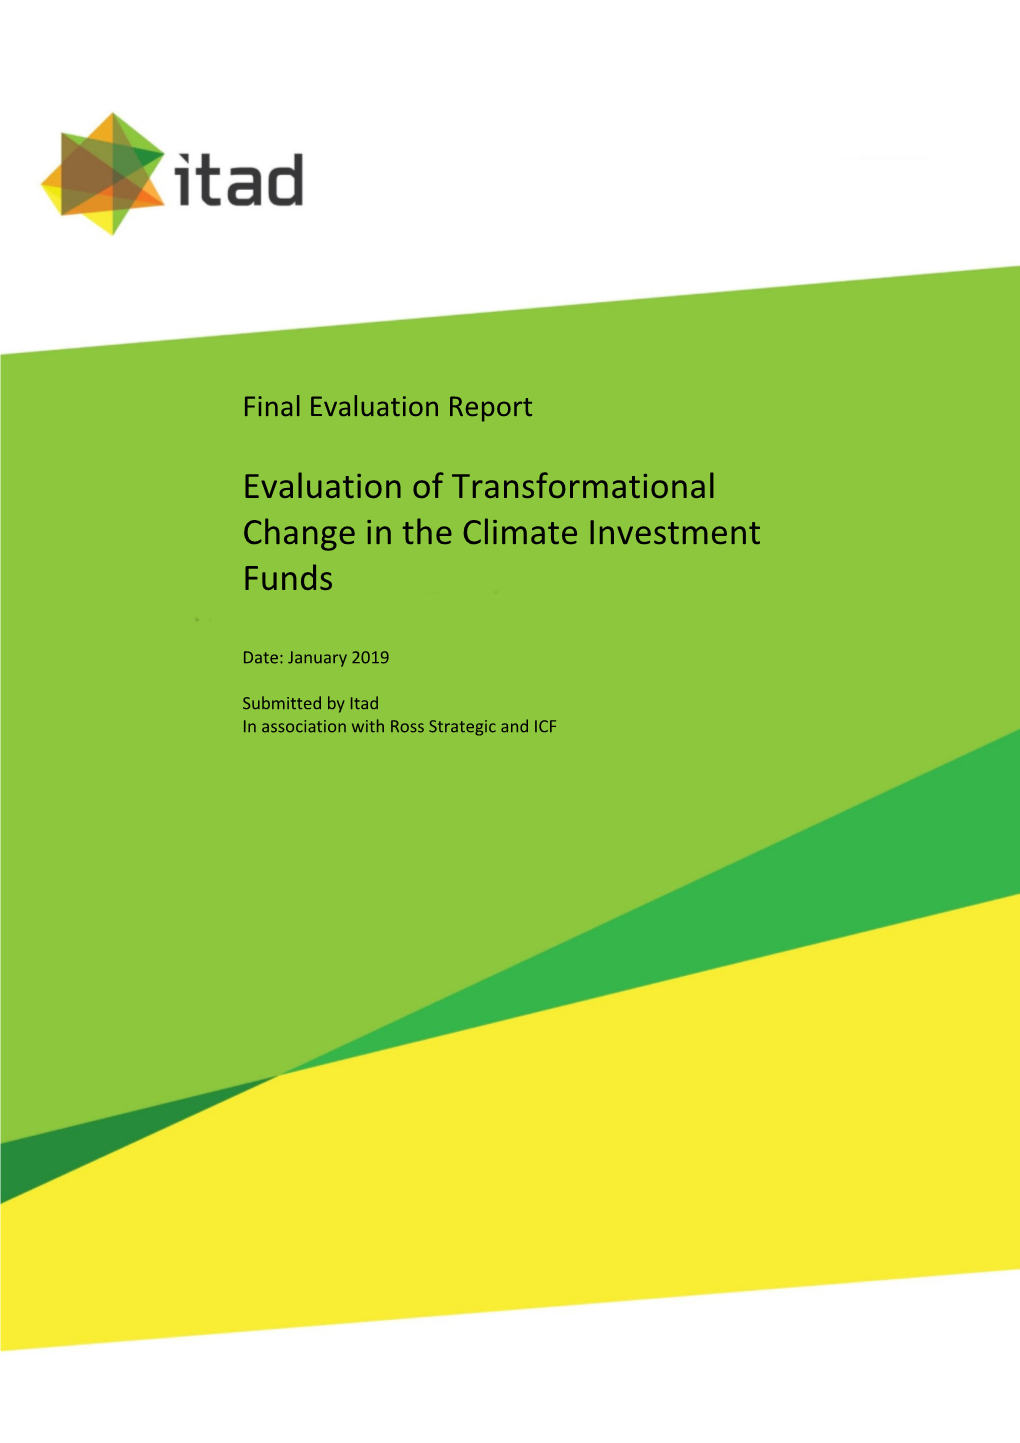 Evaluation of Transformational Change in the Climate Investment Funds